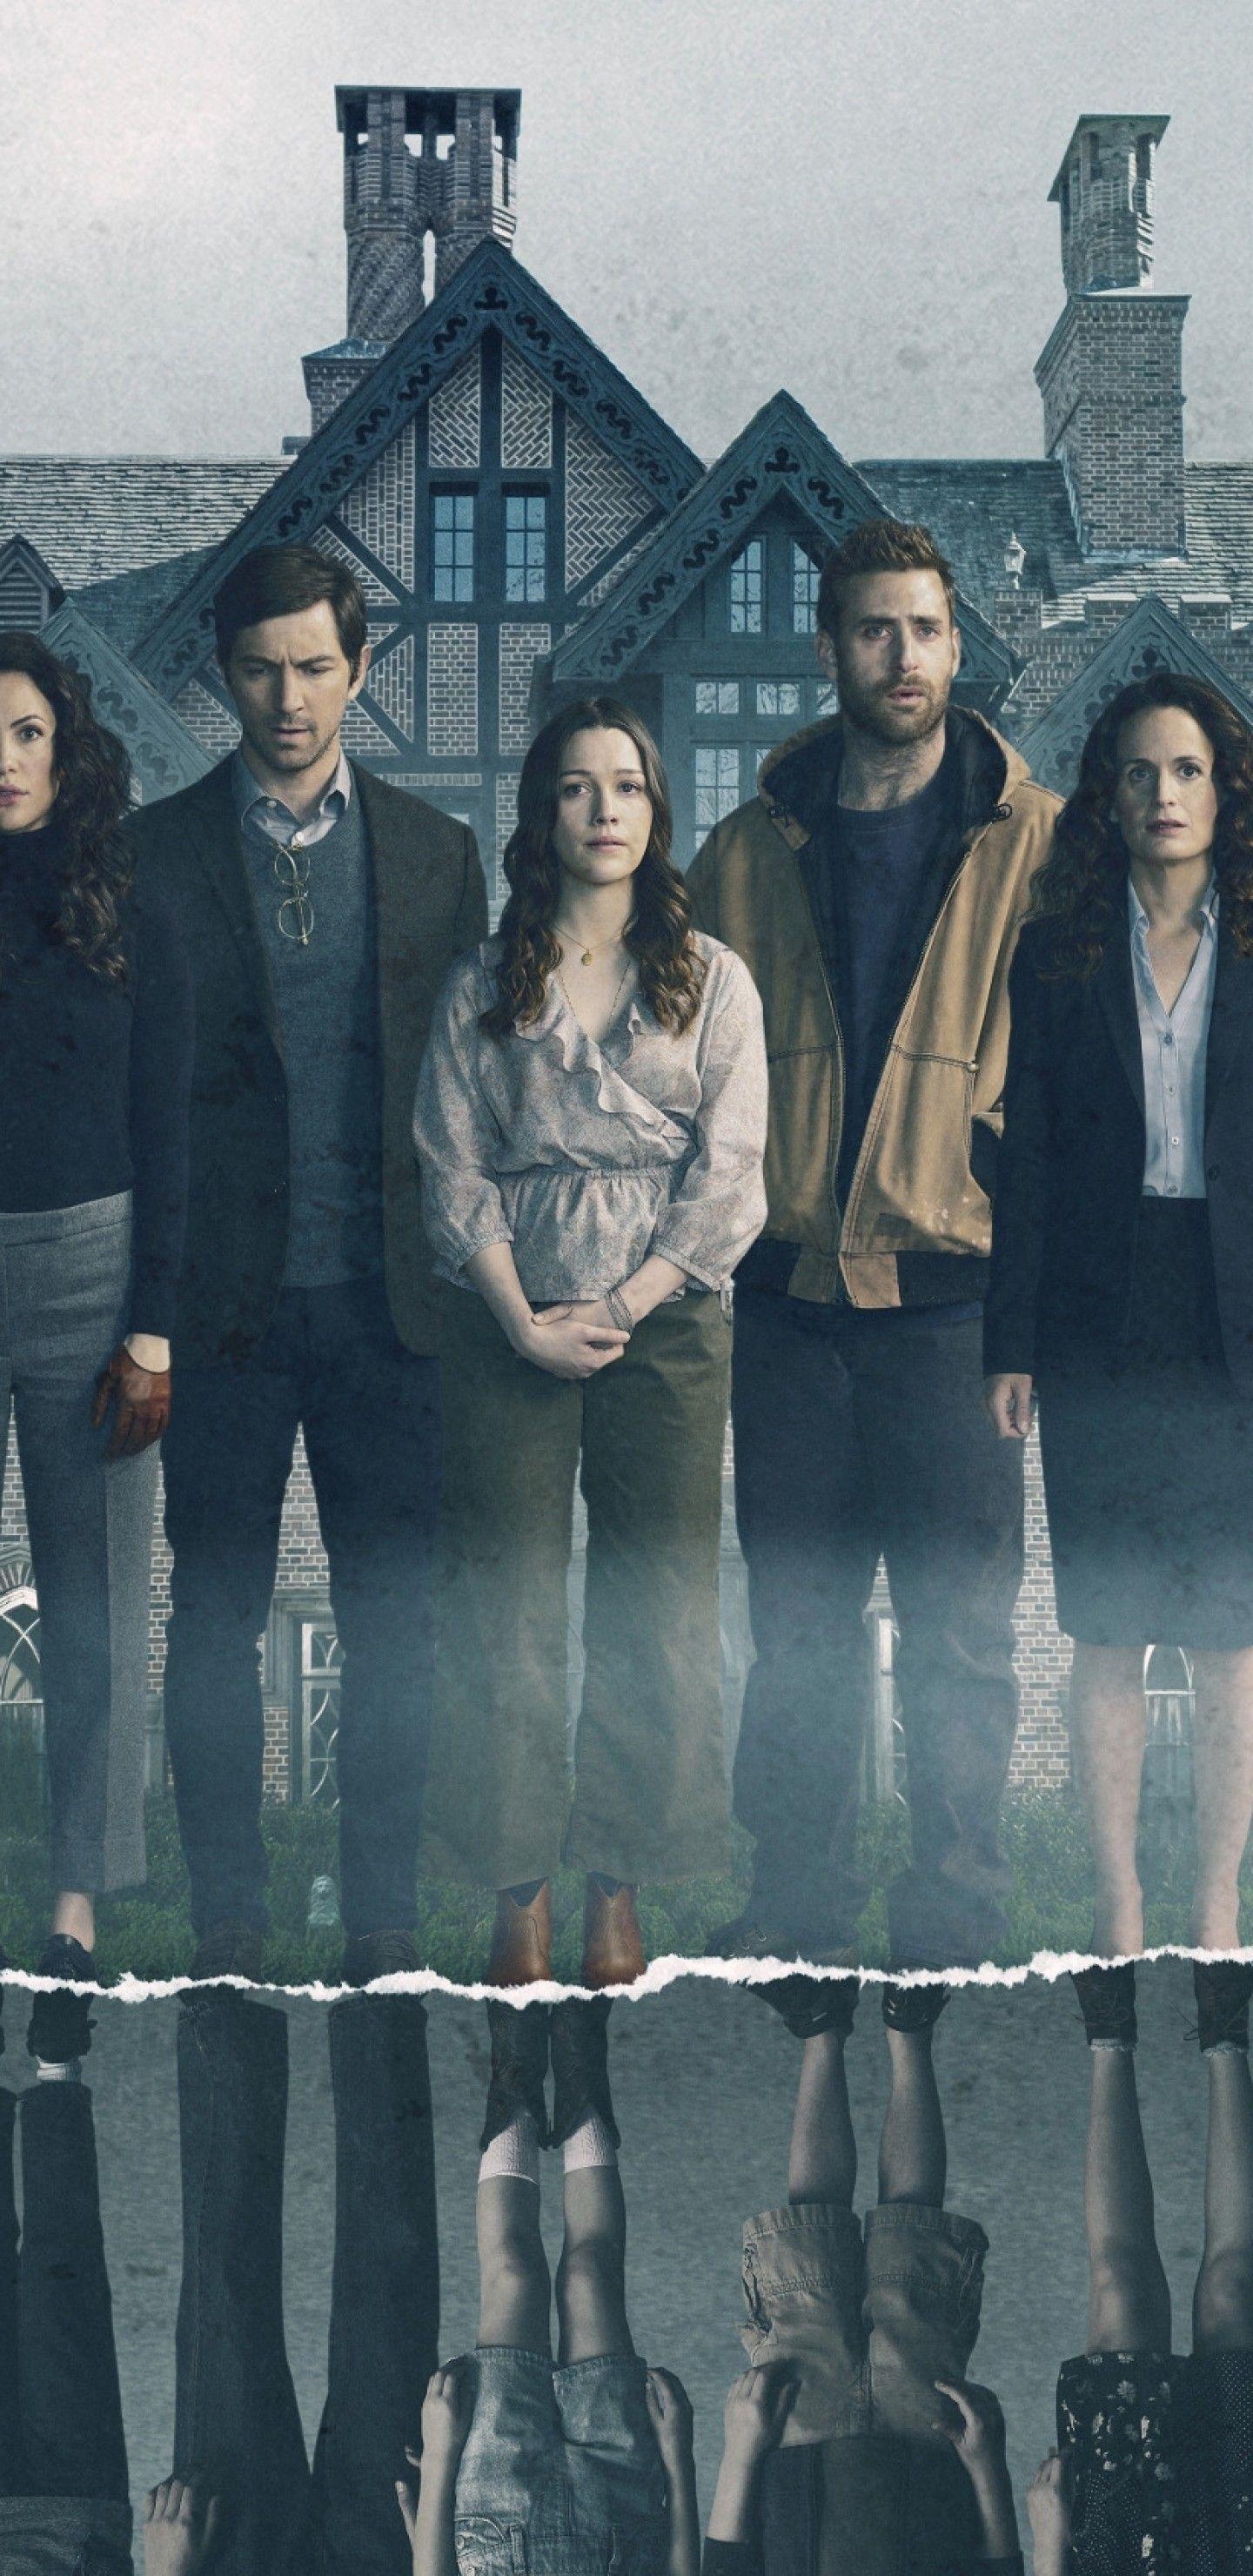 Download 1440x2960 The Haunting Of Hill House, Tv Series Wallpaper